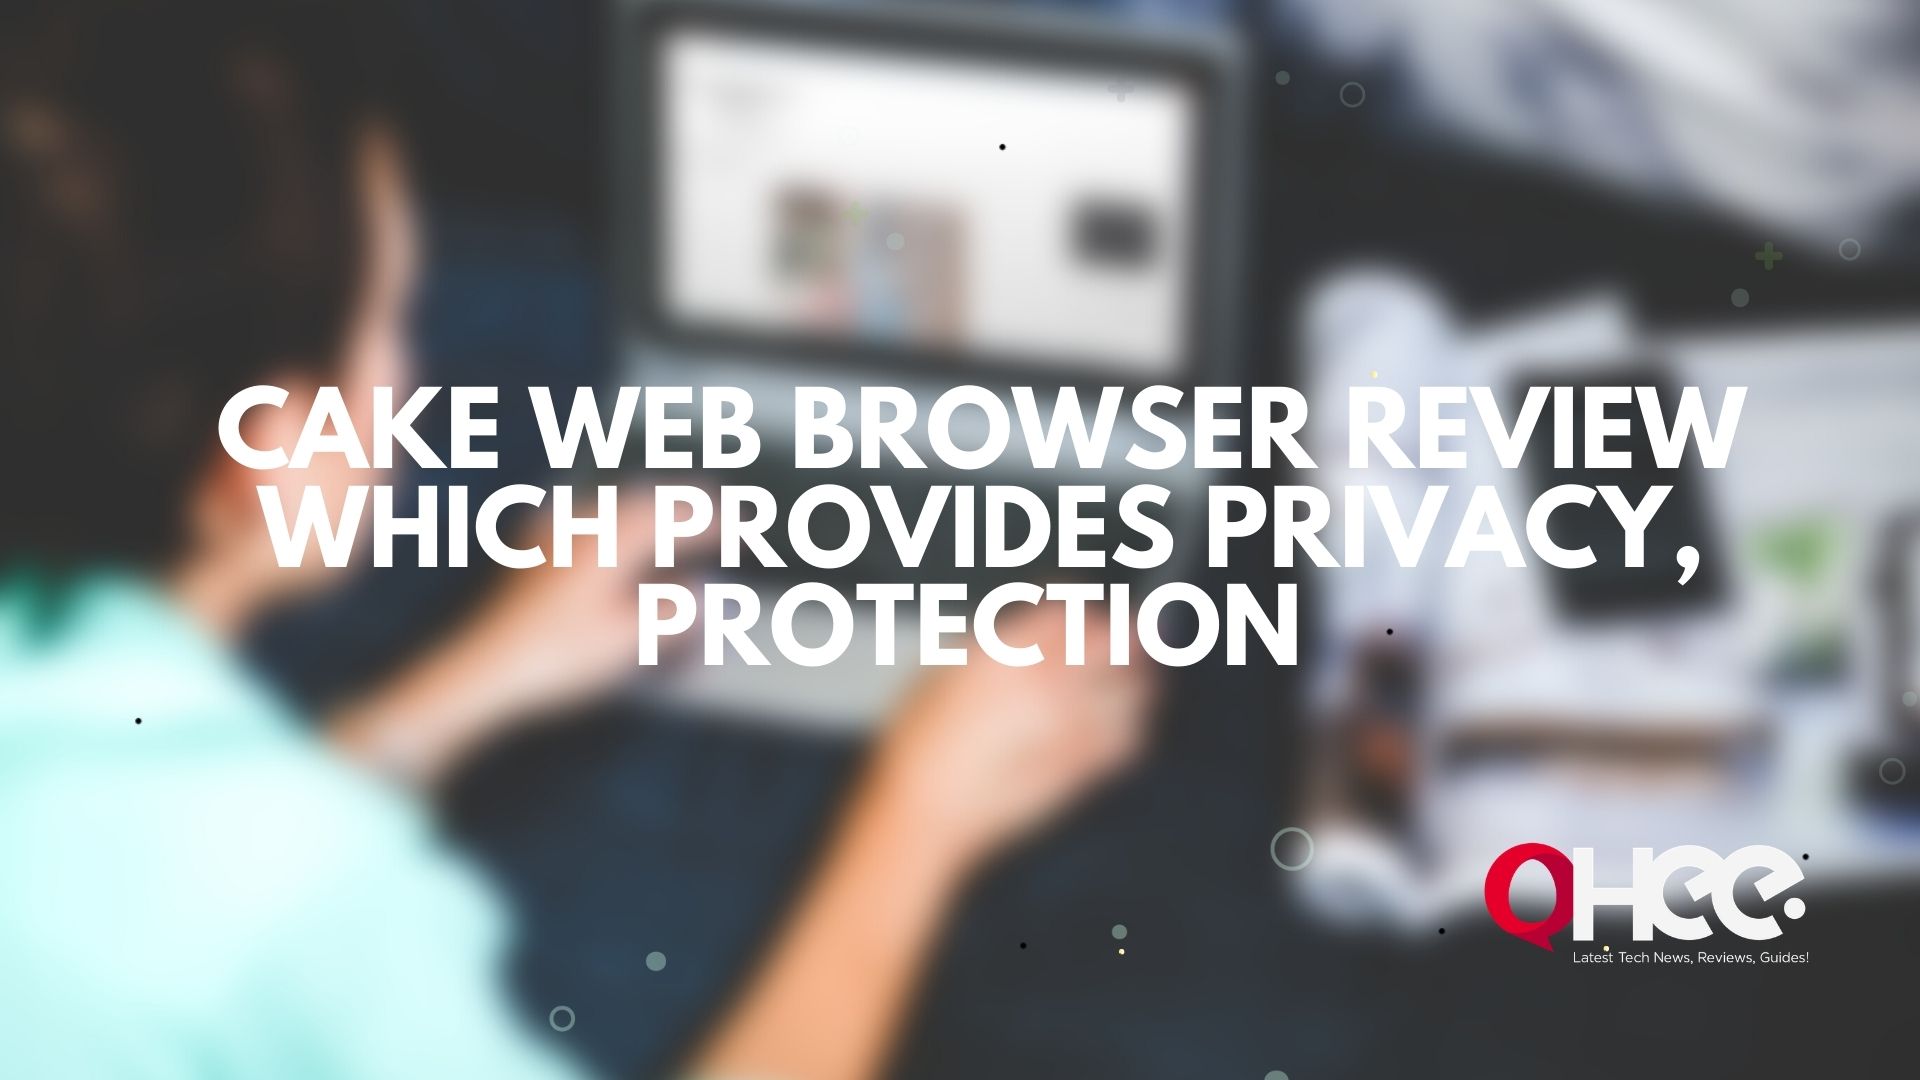 Cake Web Browser Review Which Provides Privacy, Protection